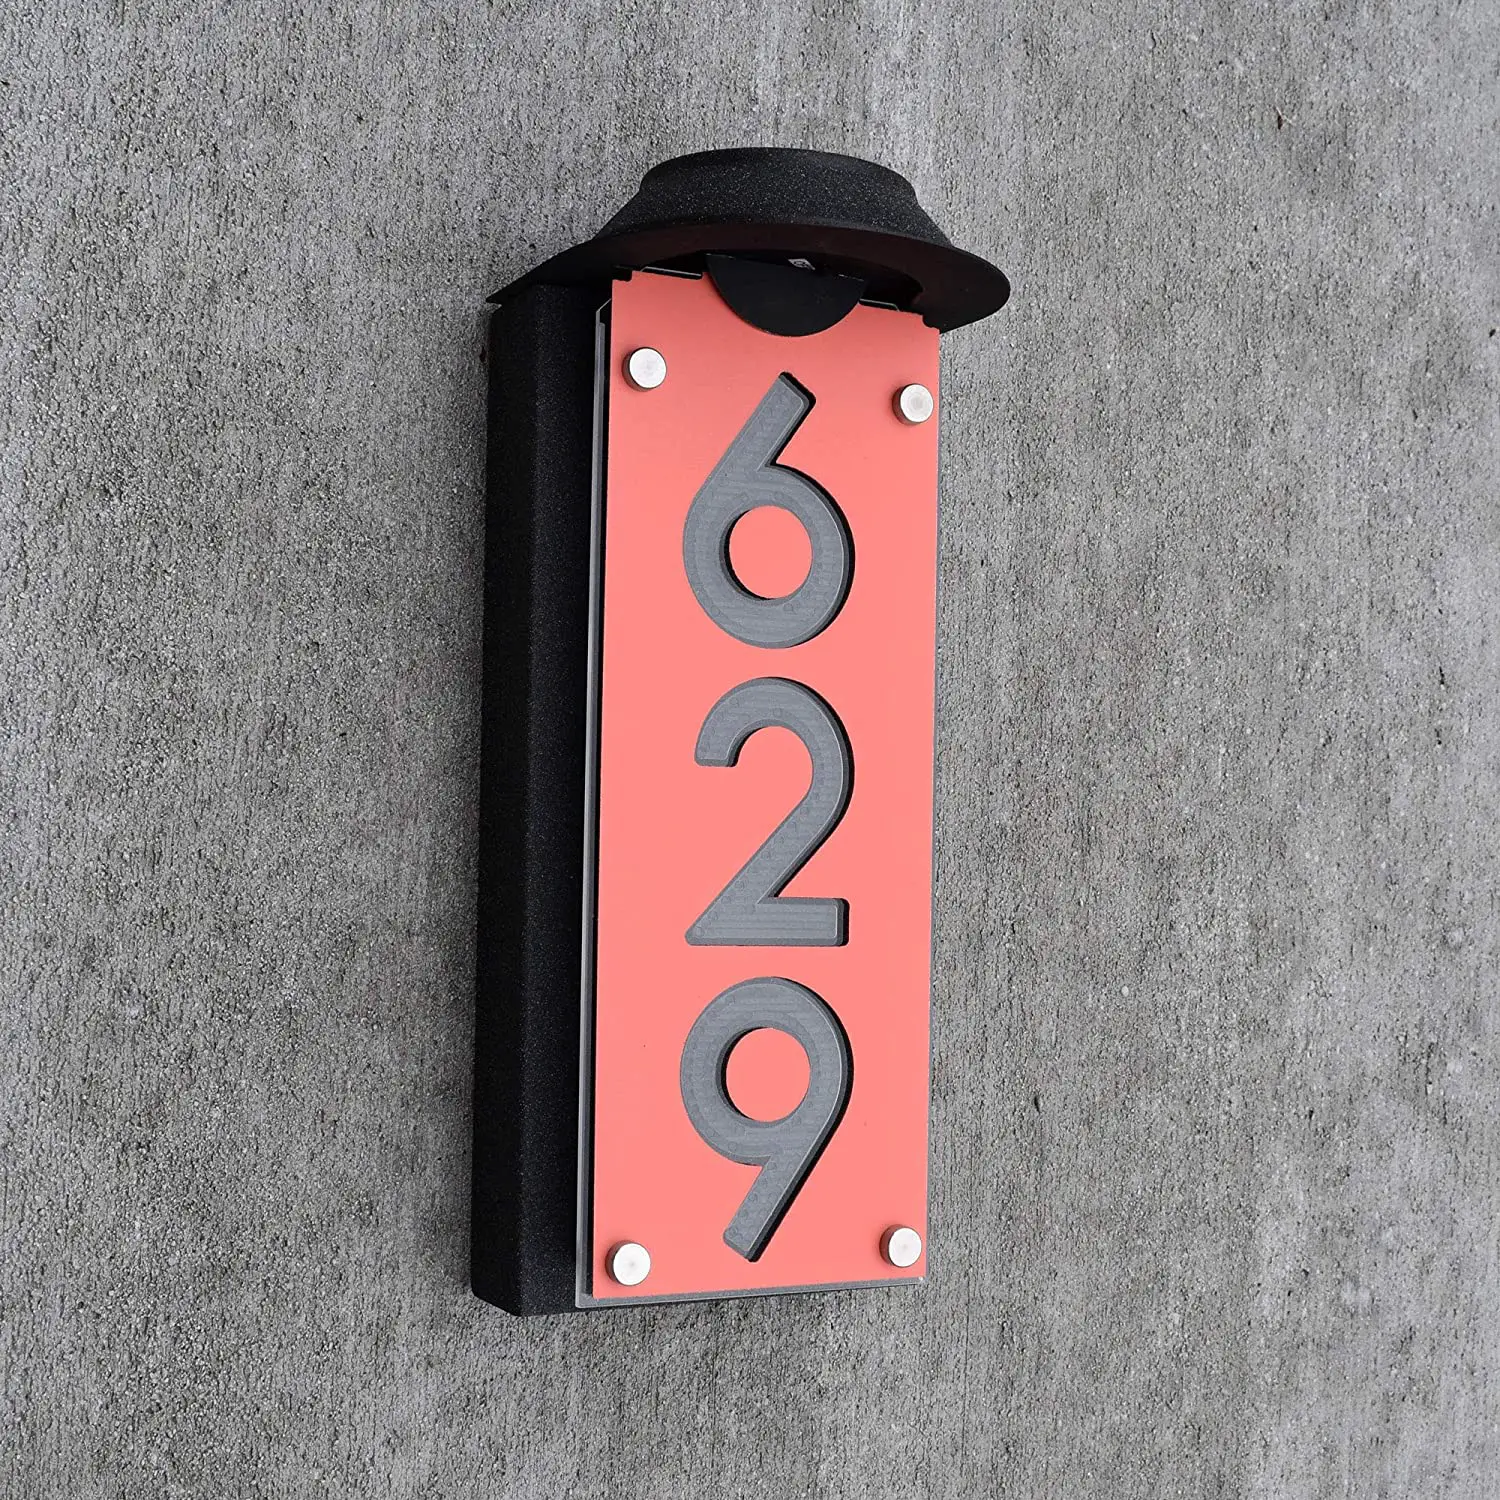 Amazon.com: LED Lighted Address Sign Solar Powered House Numbers Light ...